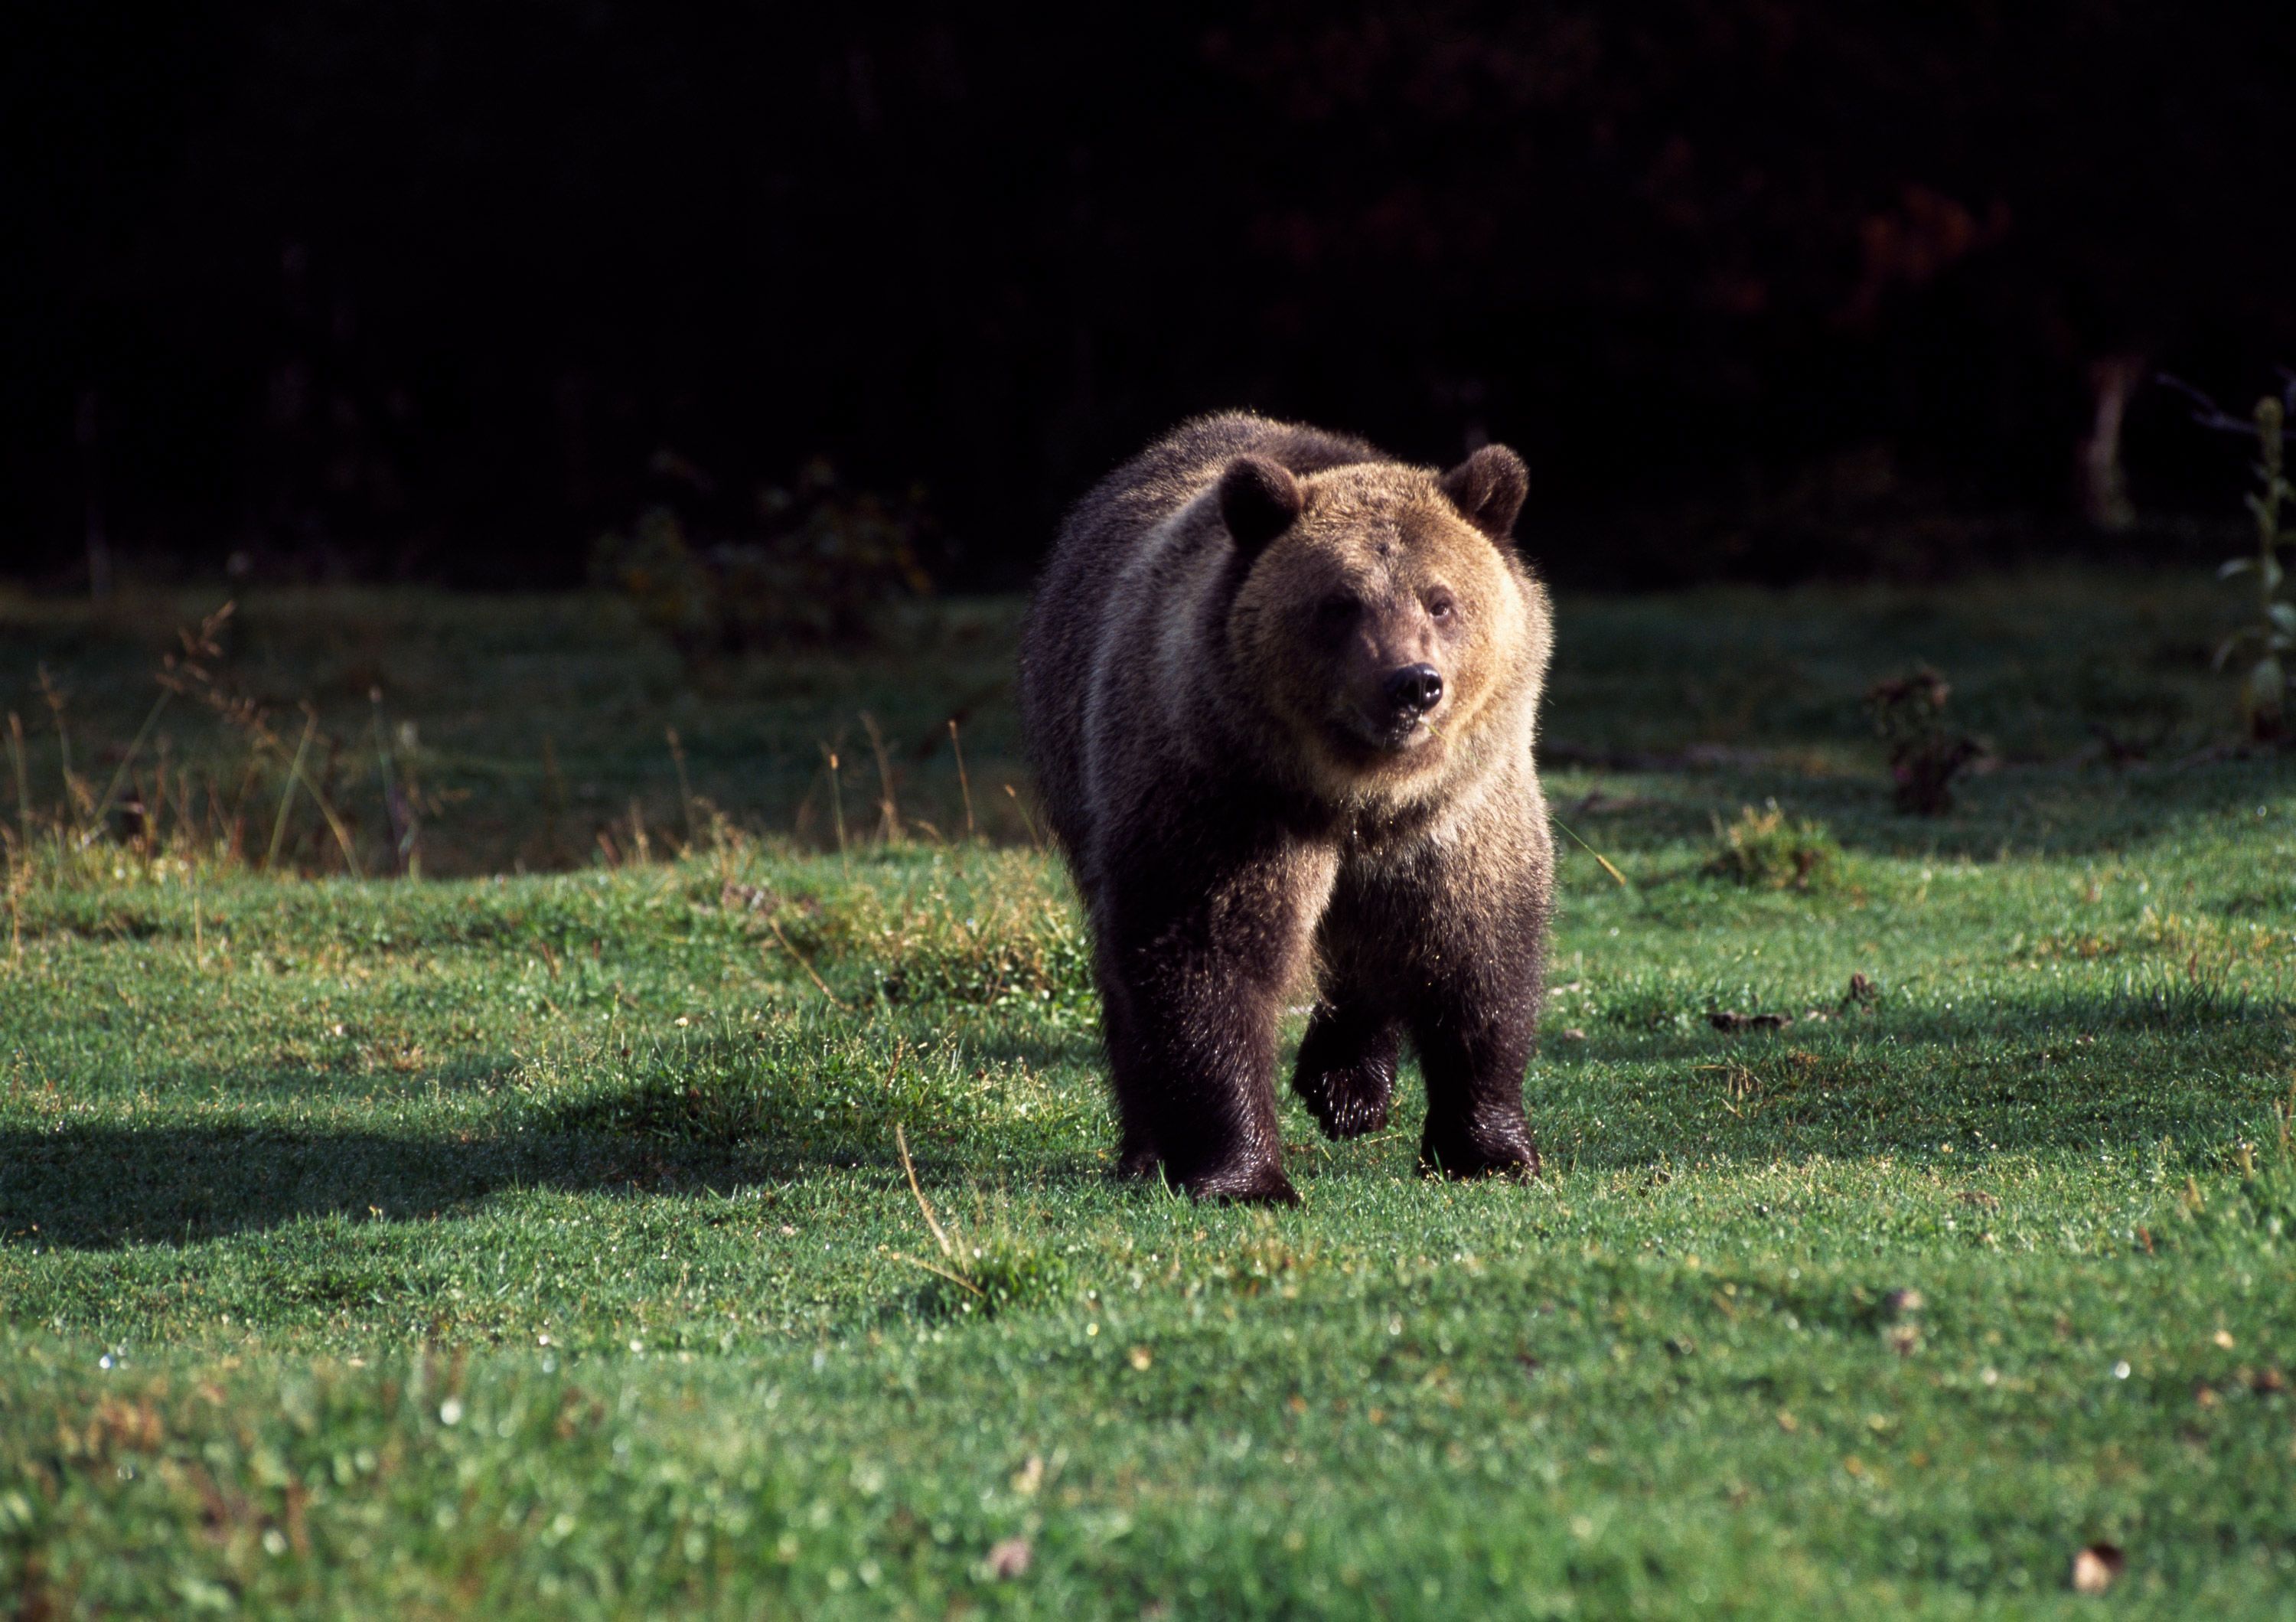 About the Grizzly Bear - Grizzly bear conservation and protection